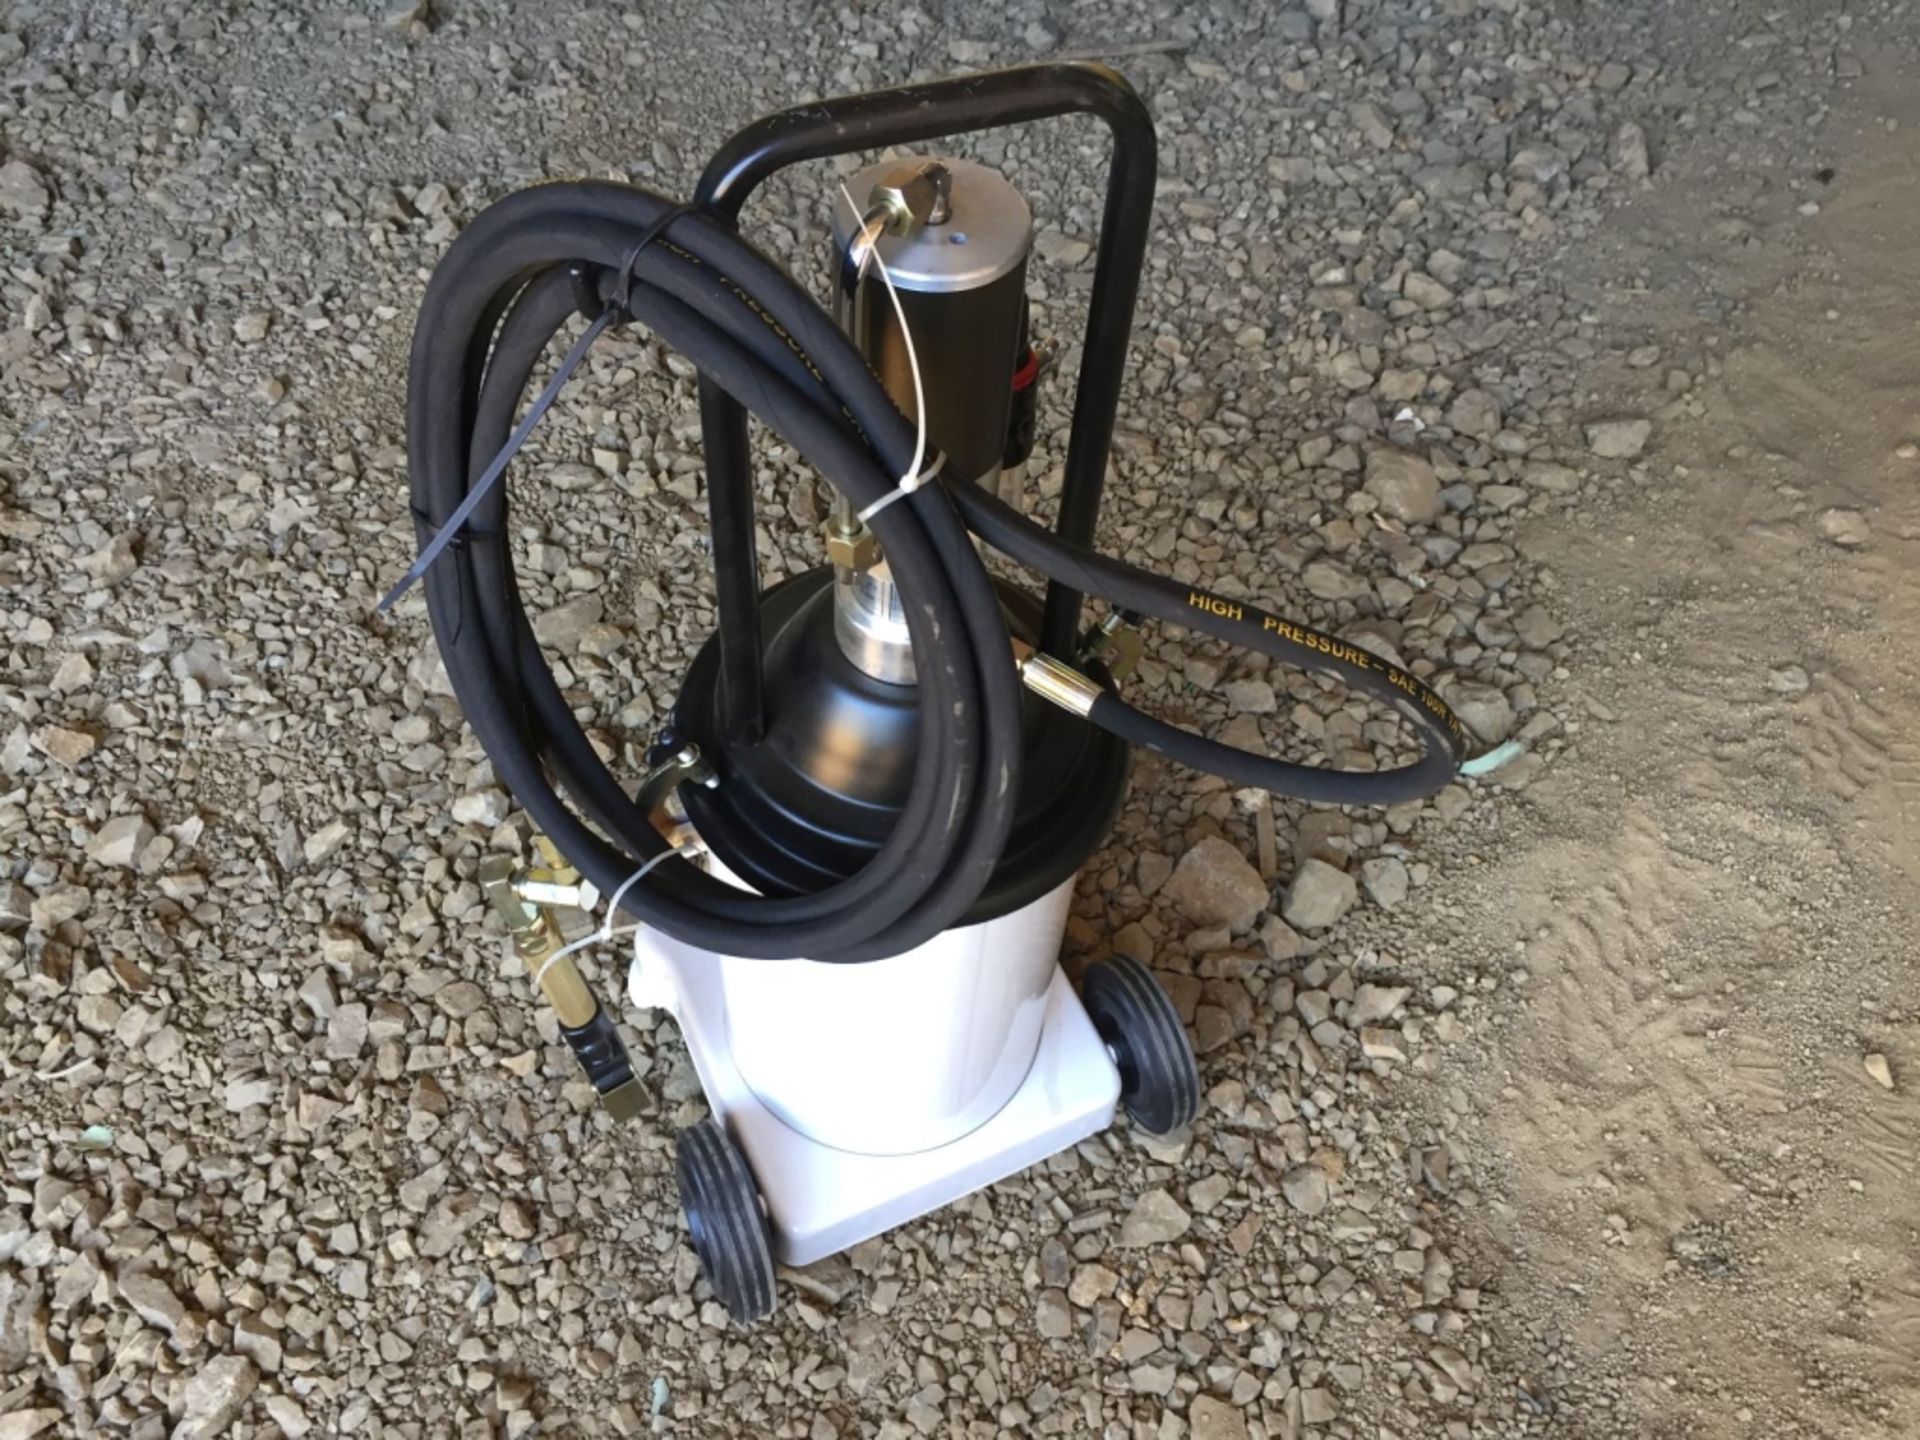 Unused 2020 Grease Buddy Pneumatic Grease Pump. - Image 6 of 8